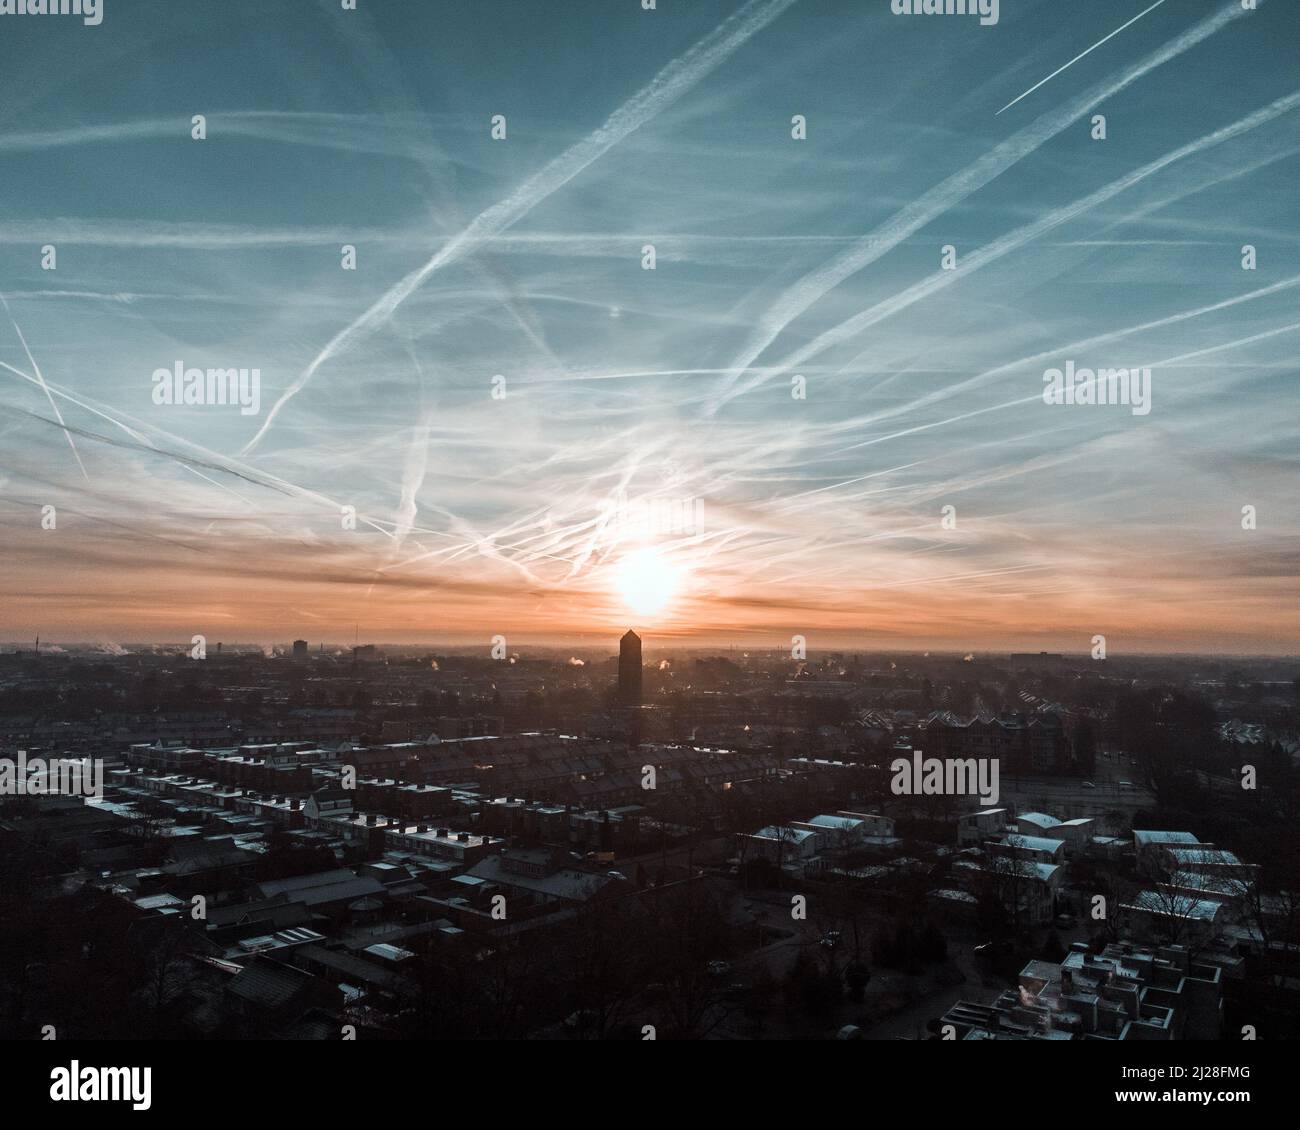 A scenic view of lots of contrails in the sky over the city Stock Photo